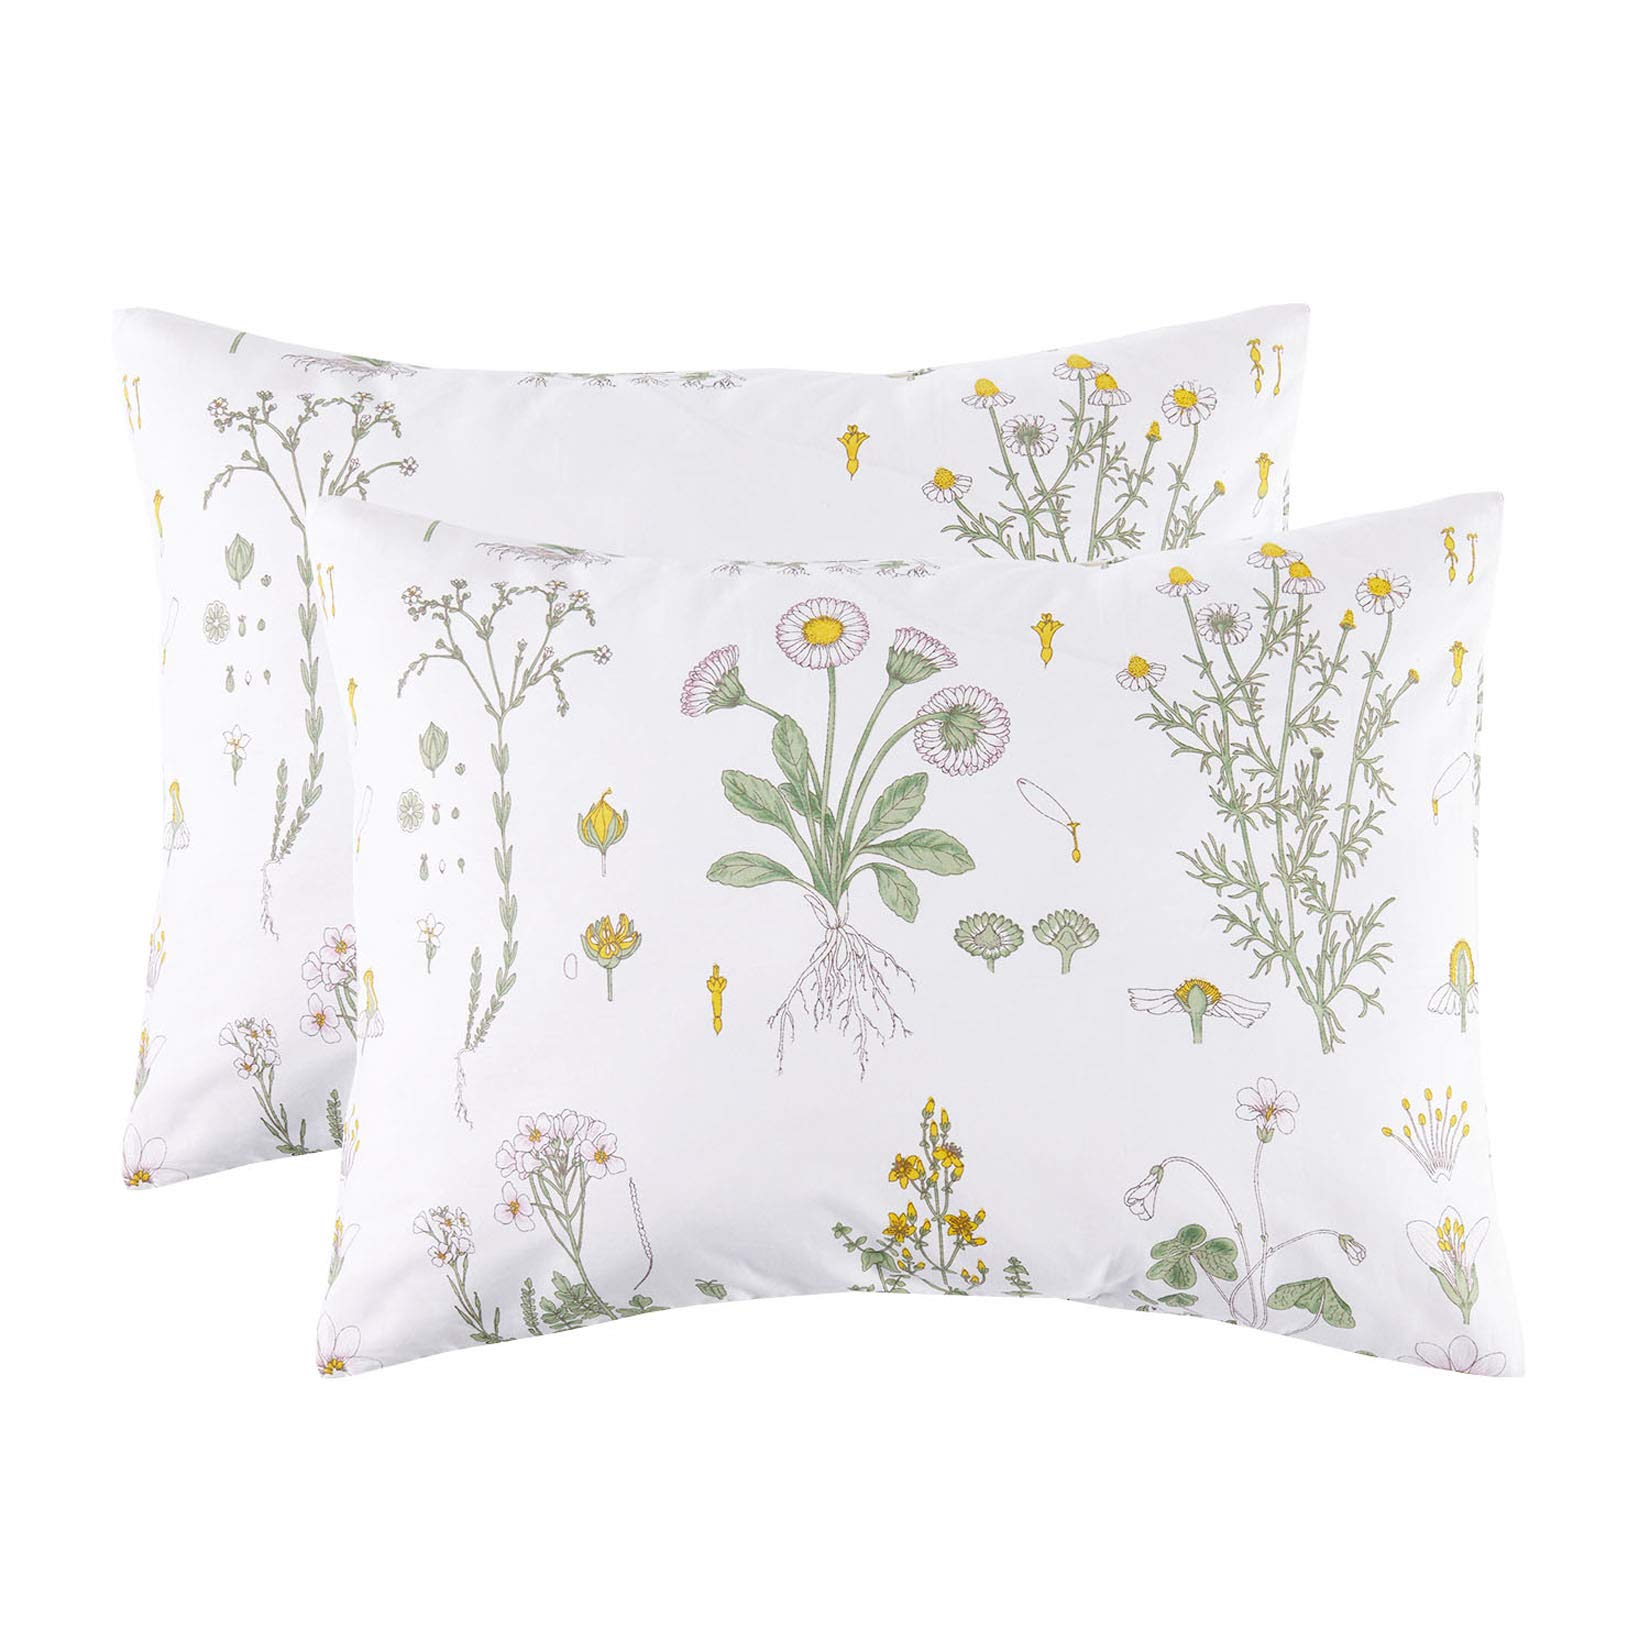 Book Cover Wake In Cloud - Pack of 2 Pillow Cases, 100% Cotton Pillowcases, White with Yellow Botanical Flowers Green Leaves Floral Garden Pattern Printed (Standard Size, 20x26 Inches)